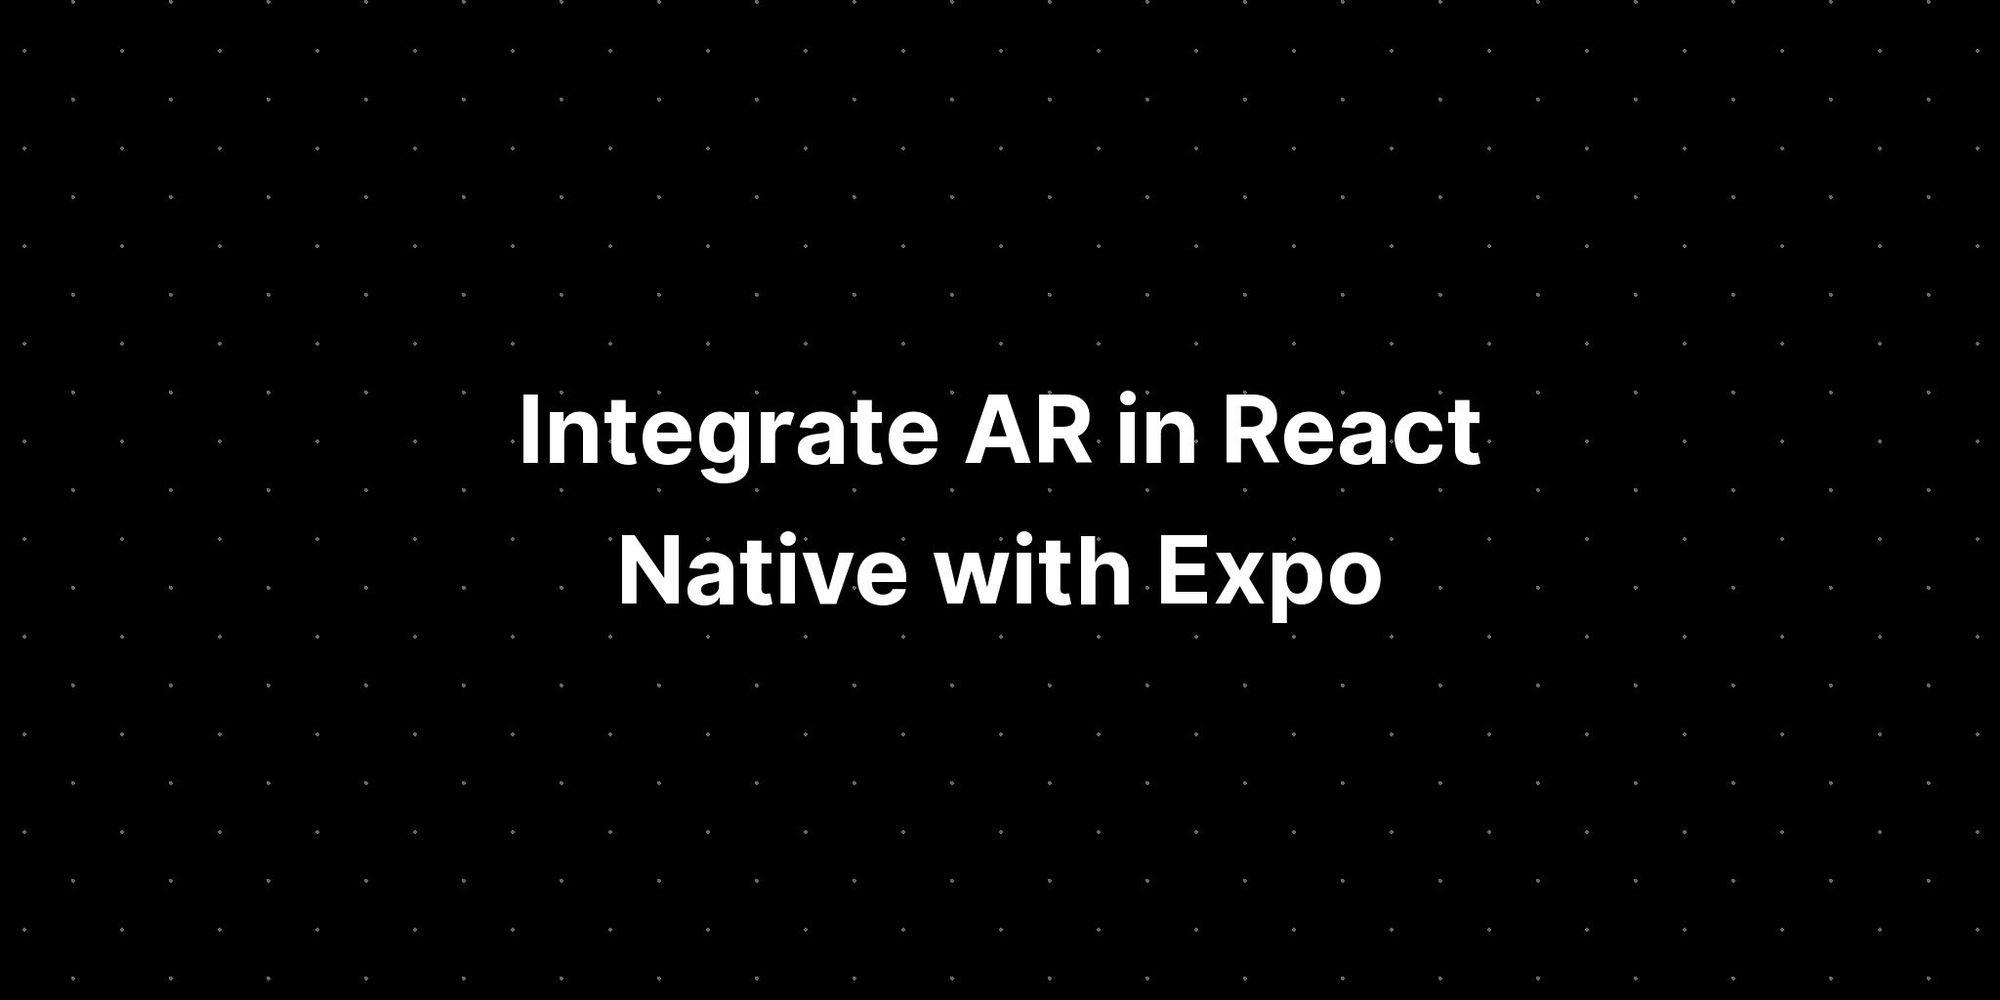 Cover Image for Integrate AR in React Native with Expo